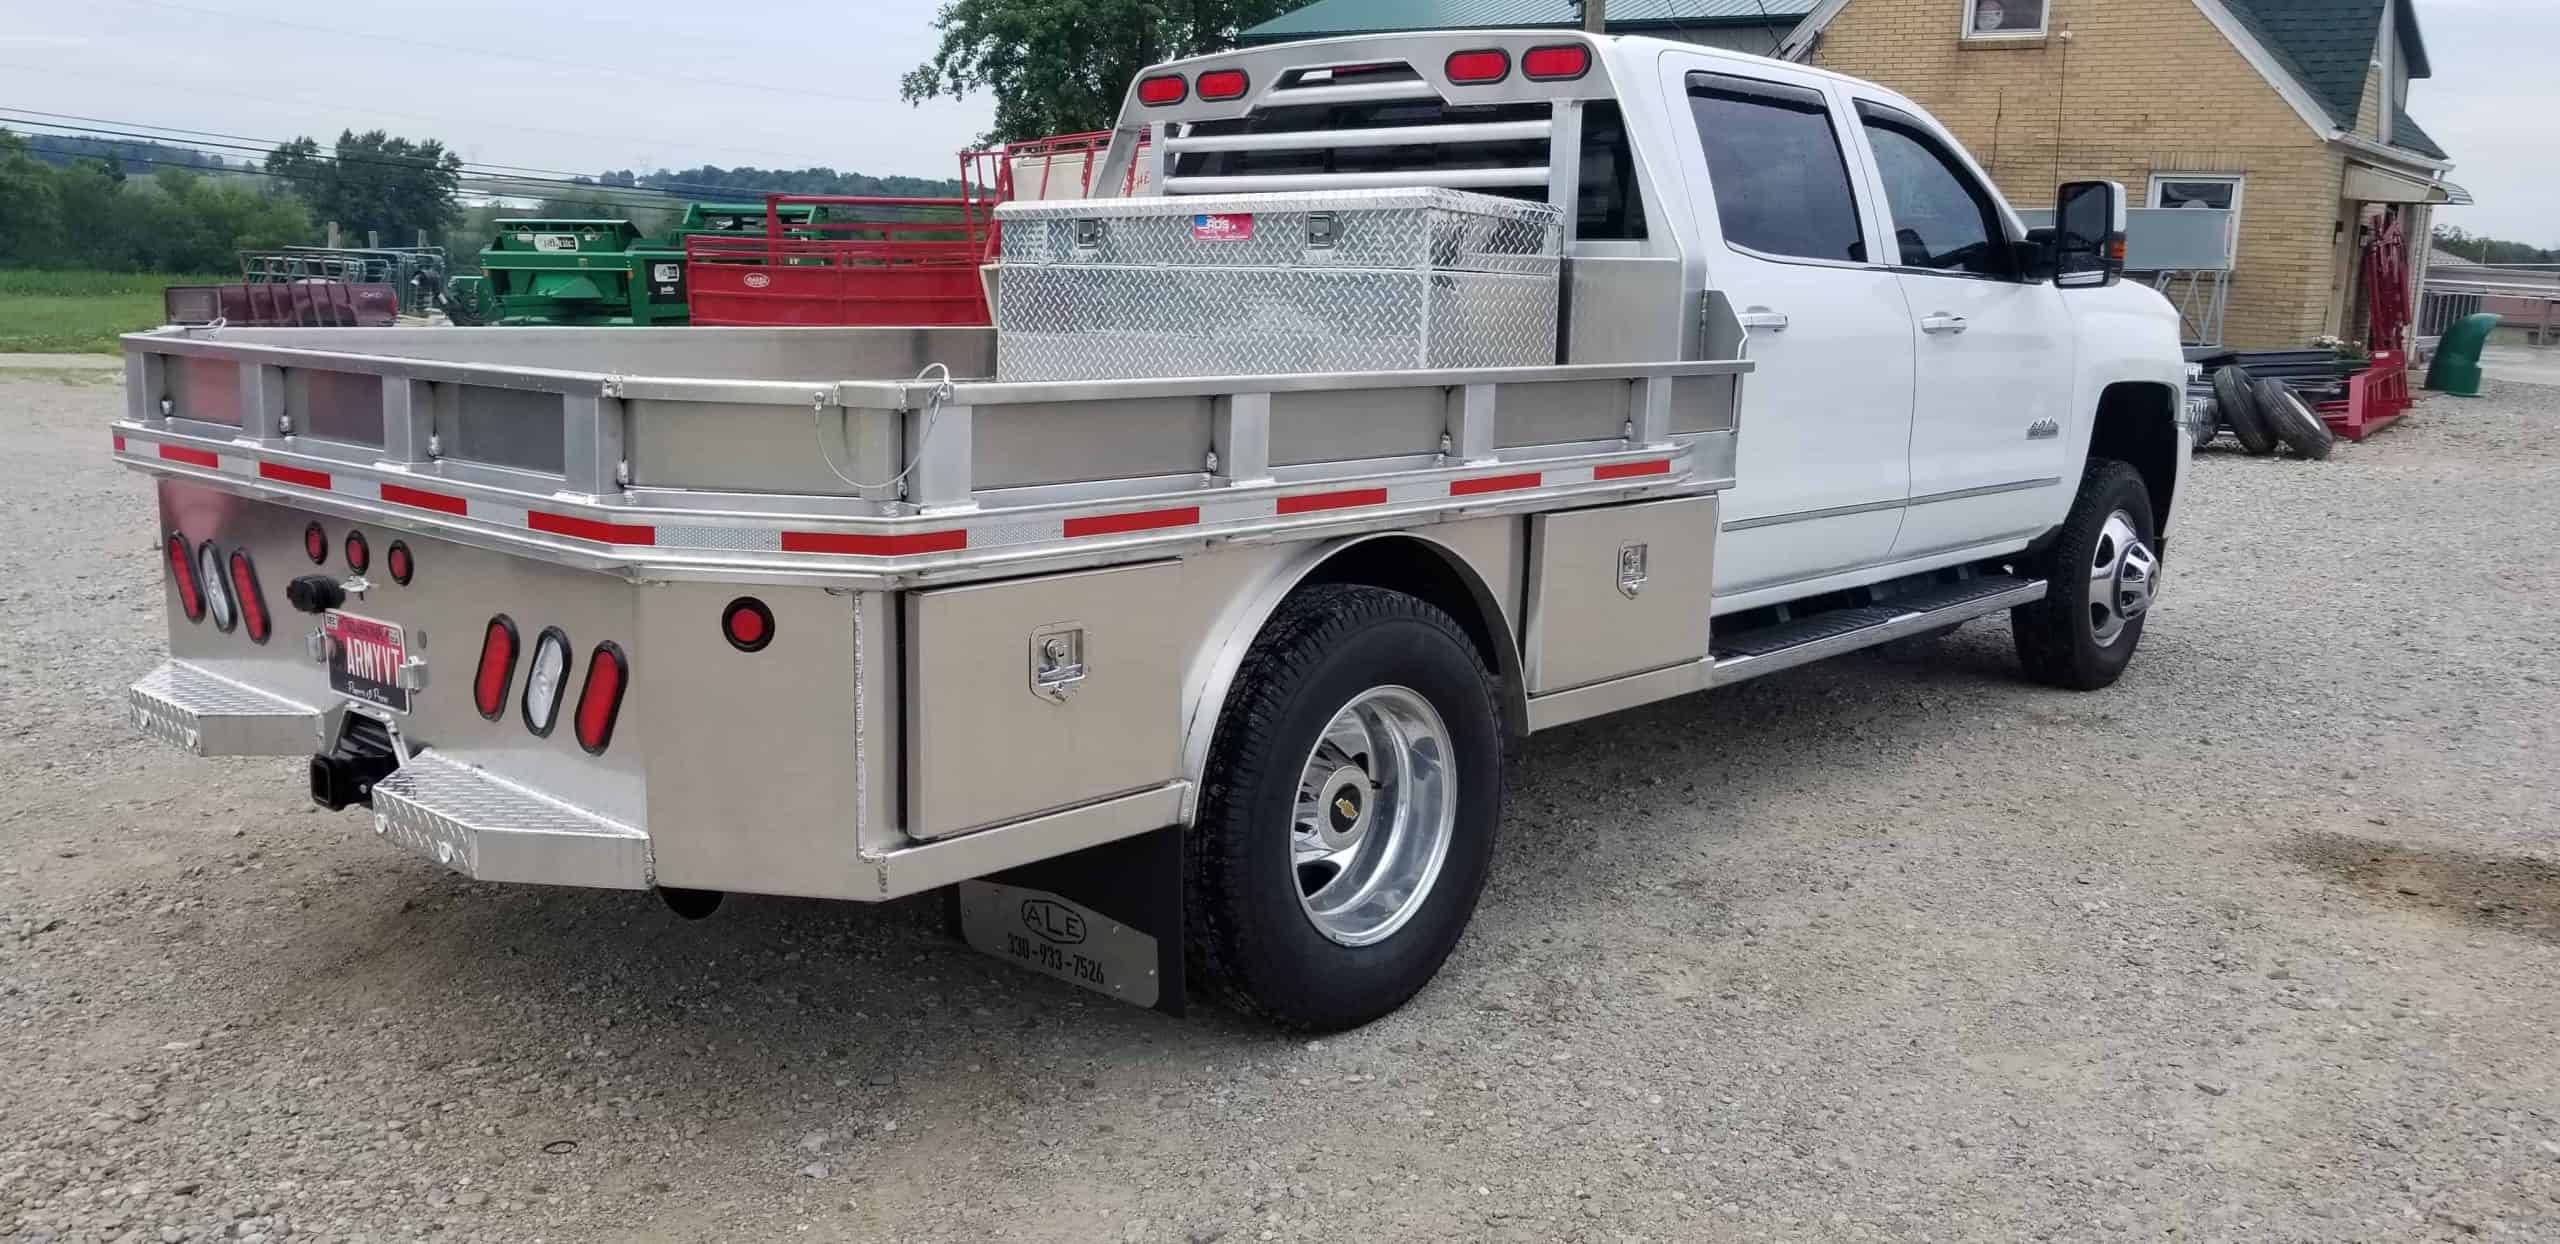 Take a look at our Aluminum Flatbeds. Get yours ordered today!!